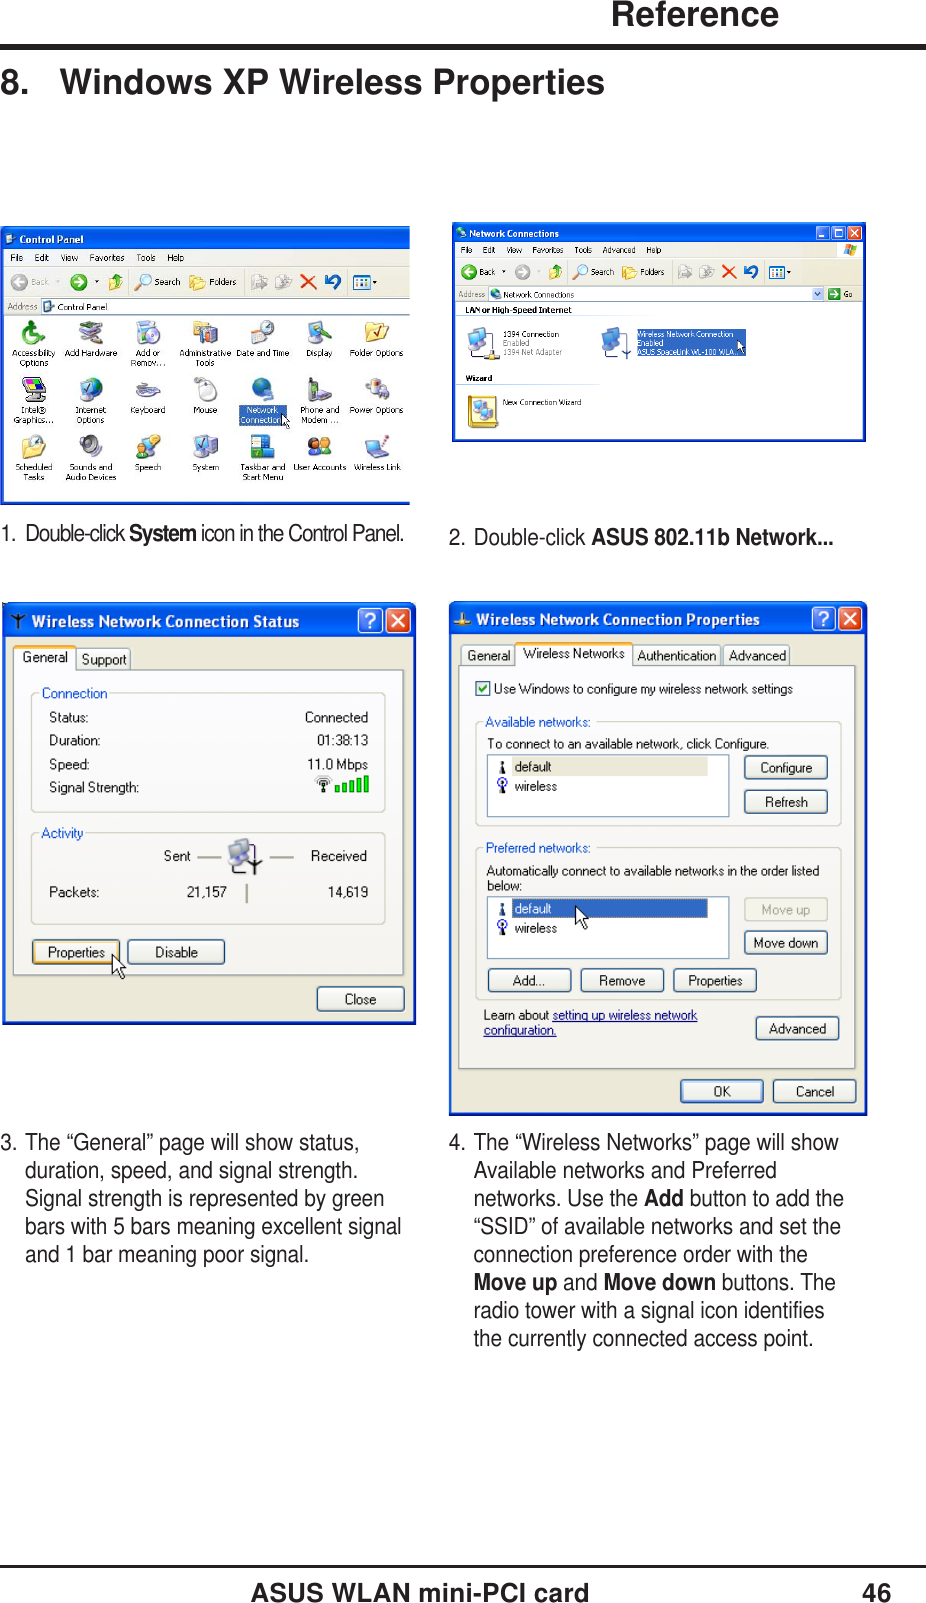 ASUS WLAN mini-PCI card 46               ReferenceChapter 38. Windows XP Wireless Properties2. Double-click ASUS 802.11b Network...1. Double-click System icon in the Control Panel.3. The “General” page will show status,duration, speed, and signal strength.Signal strength is represented by greenbars with 5 bars meaning excellent signaland 1 bar meaning poor signal.4. The “Wireless Networks” page will showAvailable networks and Preferrednetworks. Use the Add button to add the“SSID” of available networks and set theconnection preference order with theMove up and Move down buttons. Theradio tower with a signal icon identifiesthe currently connected access point.